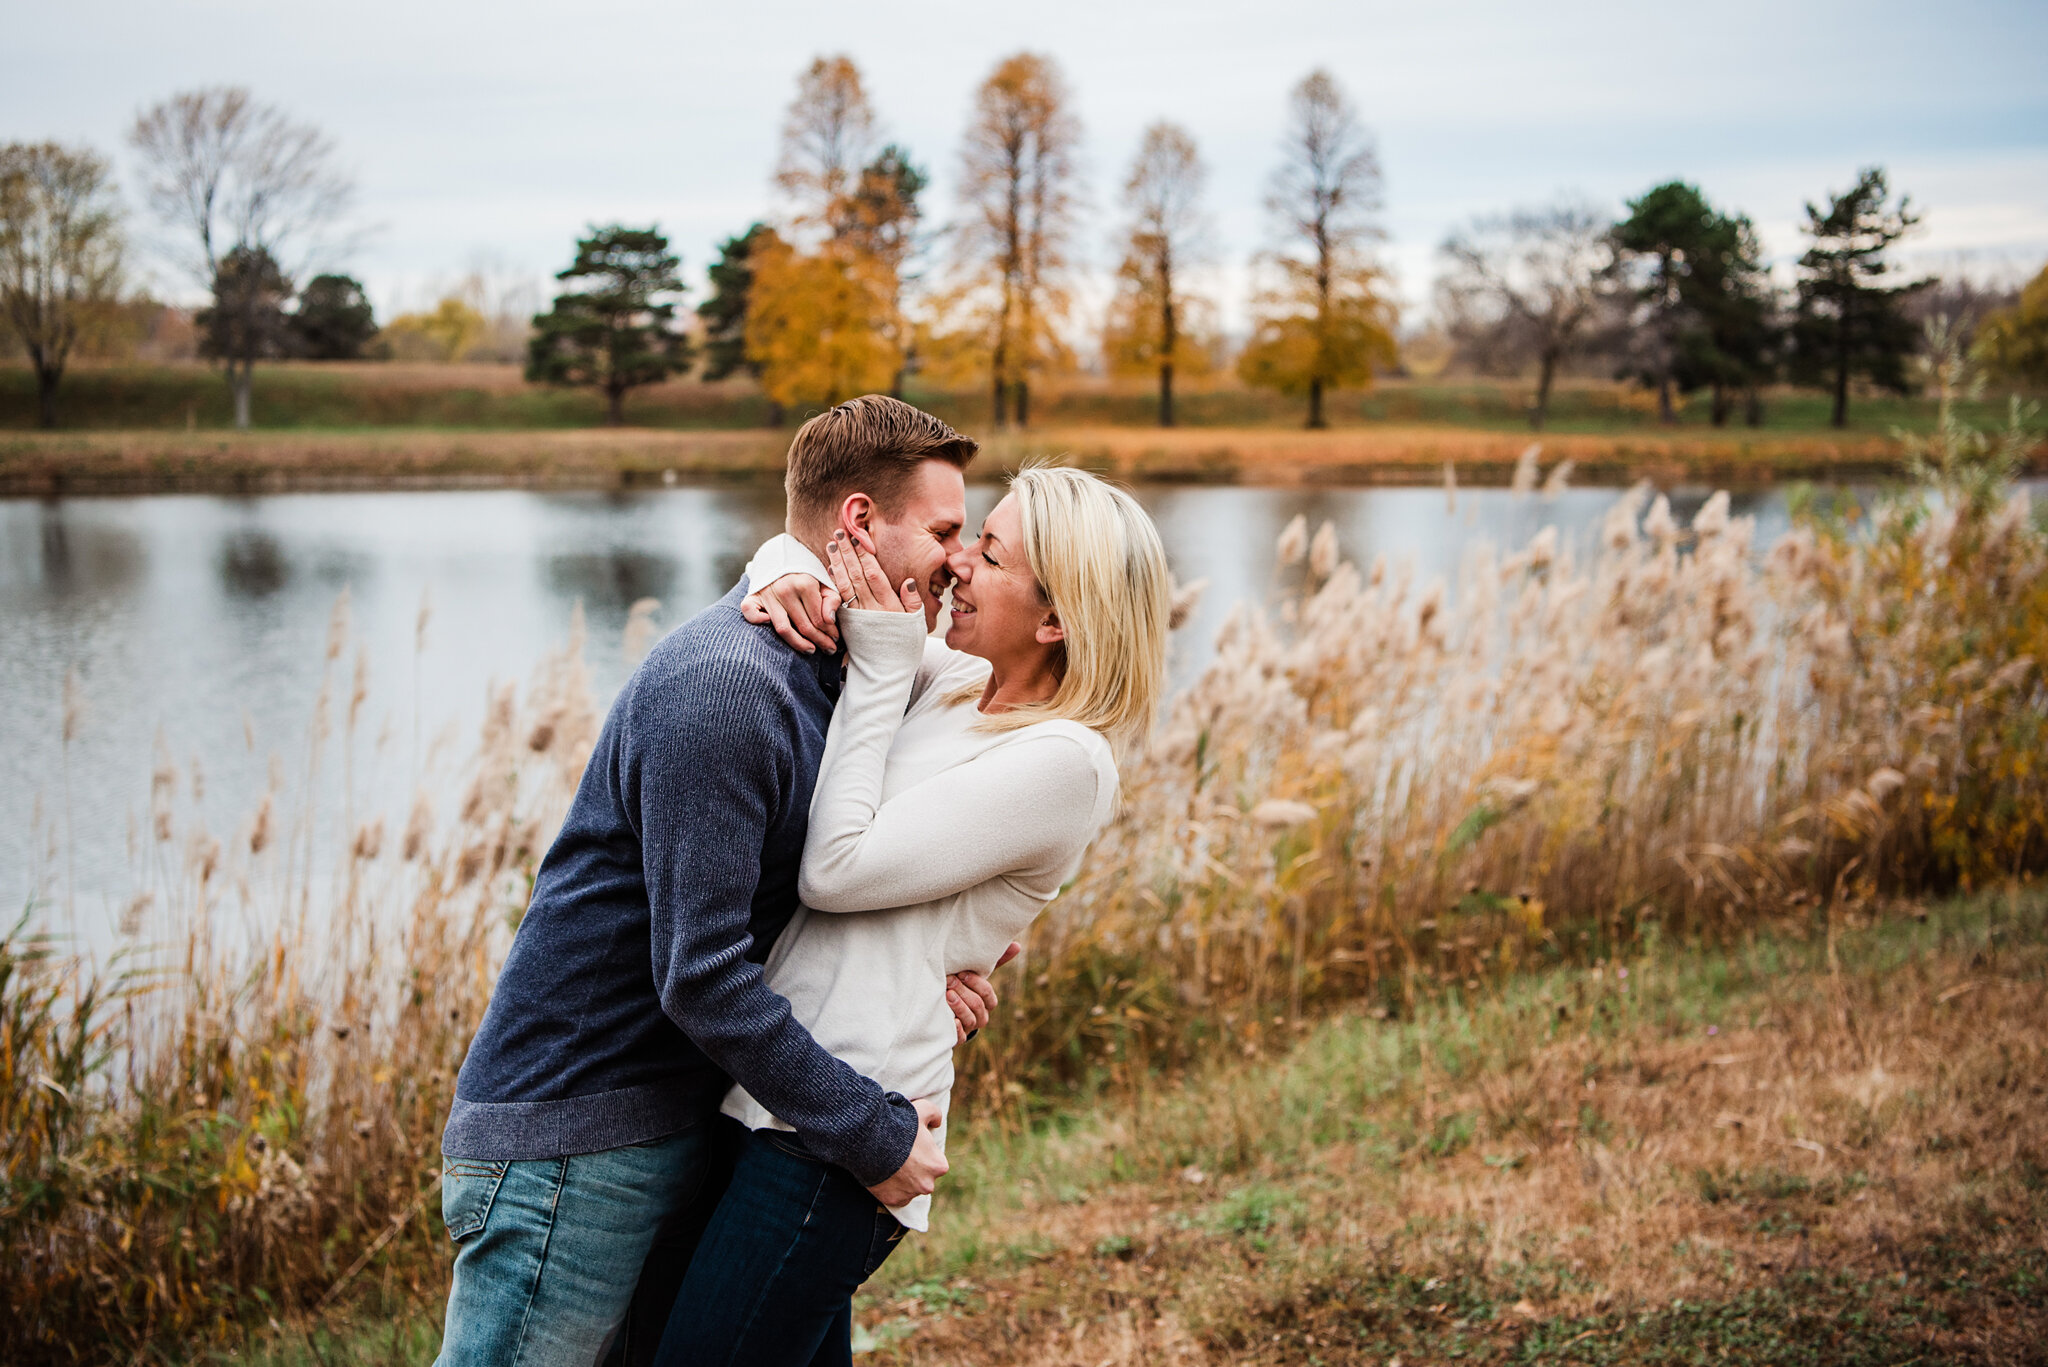 North_Ponds_Park_Rochester_Engagement_Session_JILL_STUDIO_Rochester_NY_Photographer_3620.jpg